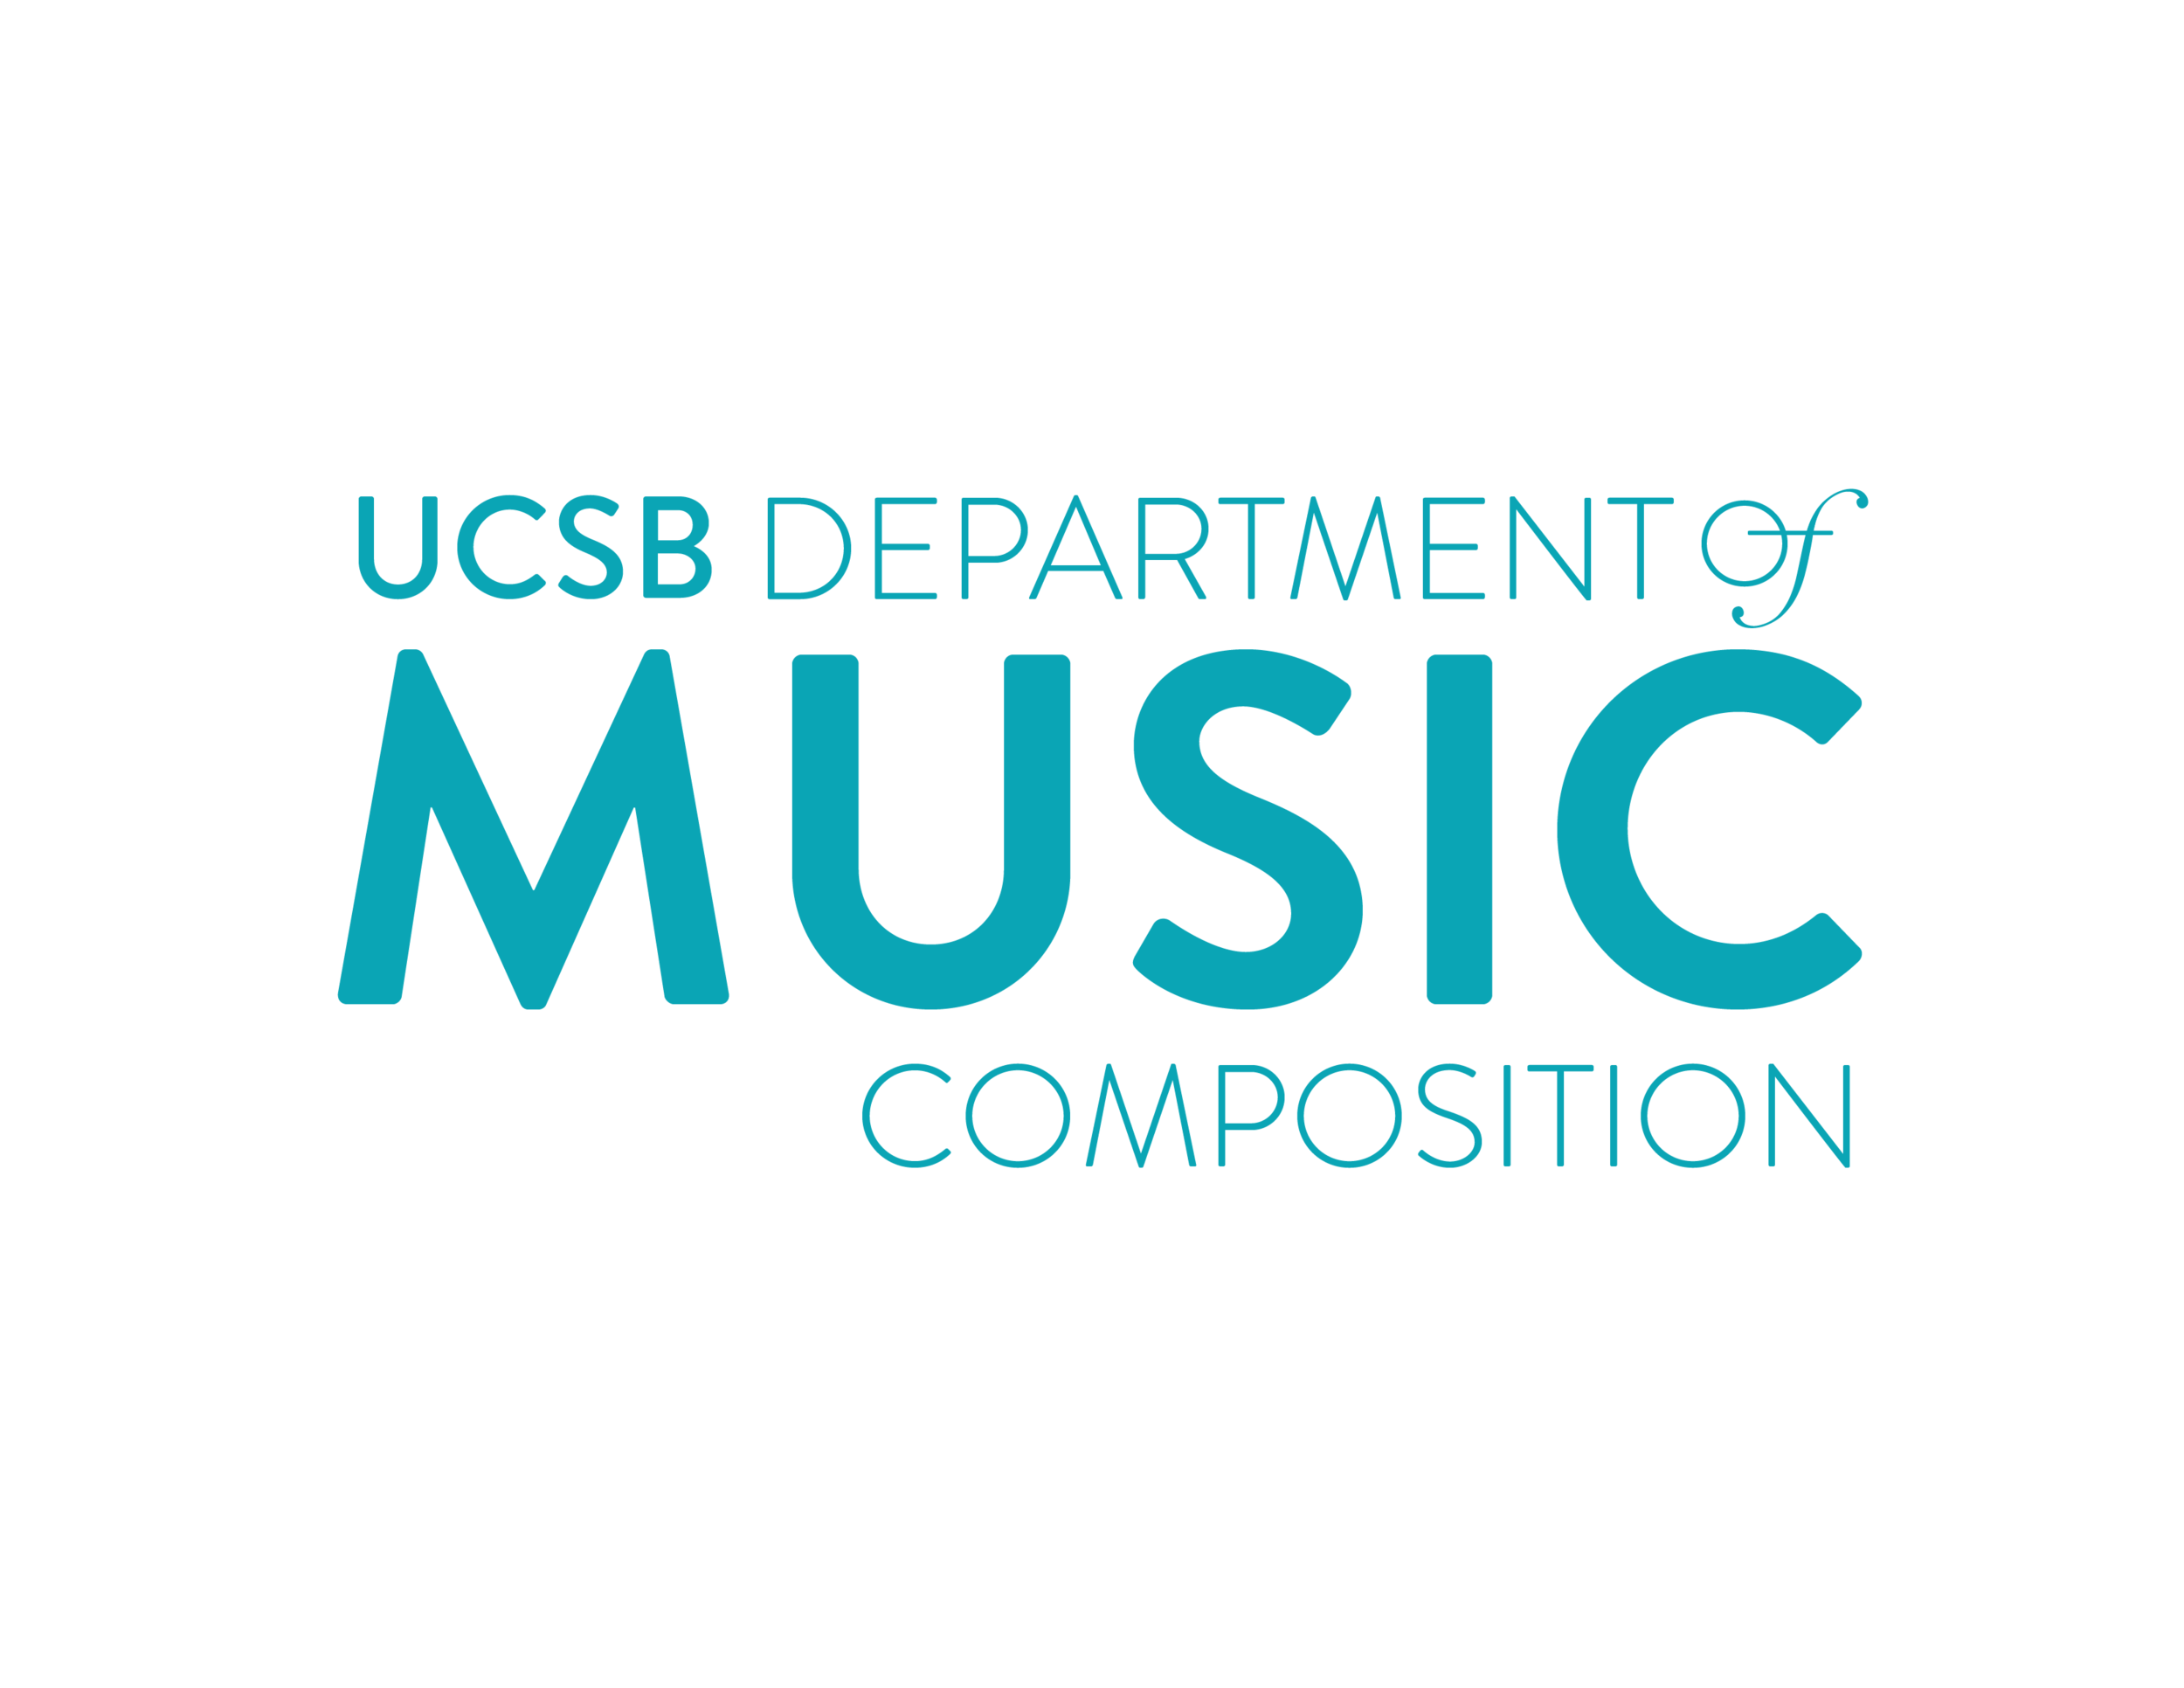 ucsb guidelines new logo and font use FINAL-10.png